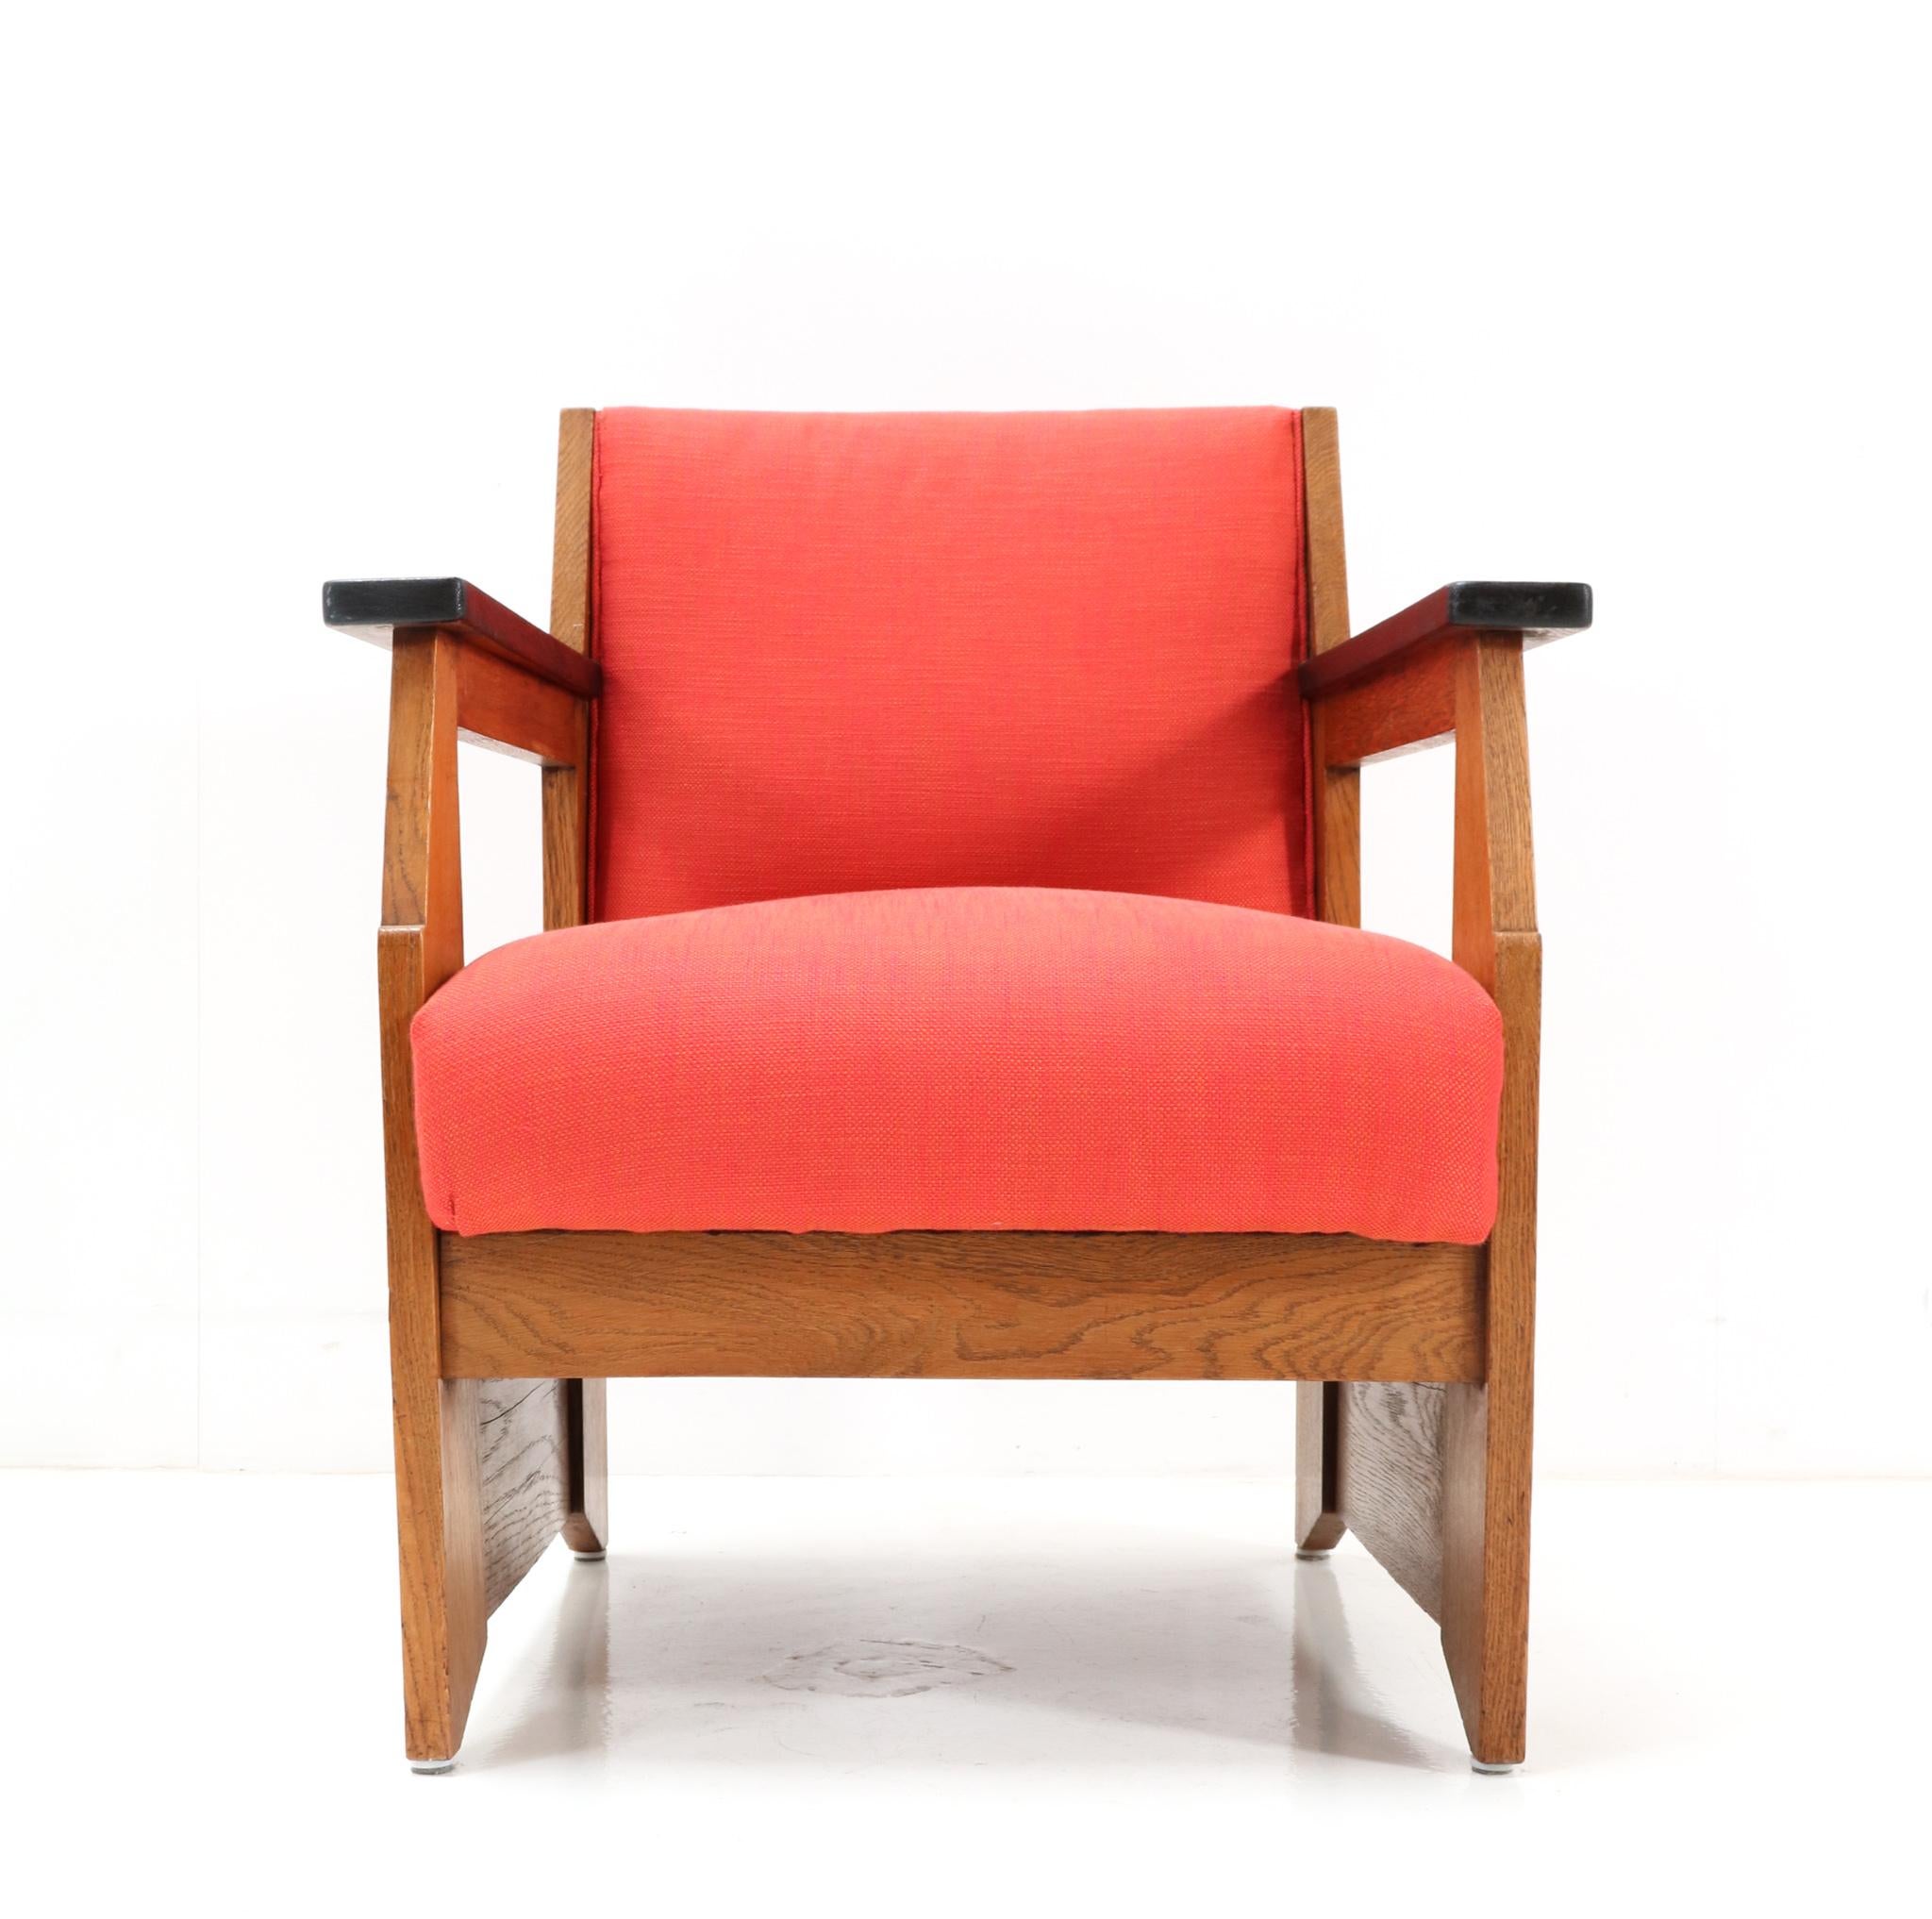 Pair of Oak Art Deco Modernist Easy Chairs by Hendrik Wouda for Pander, 1924 For Sale 4